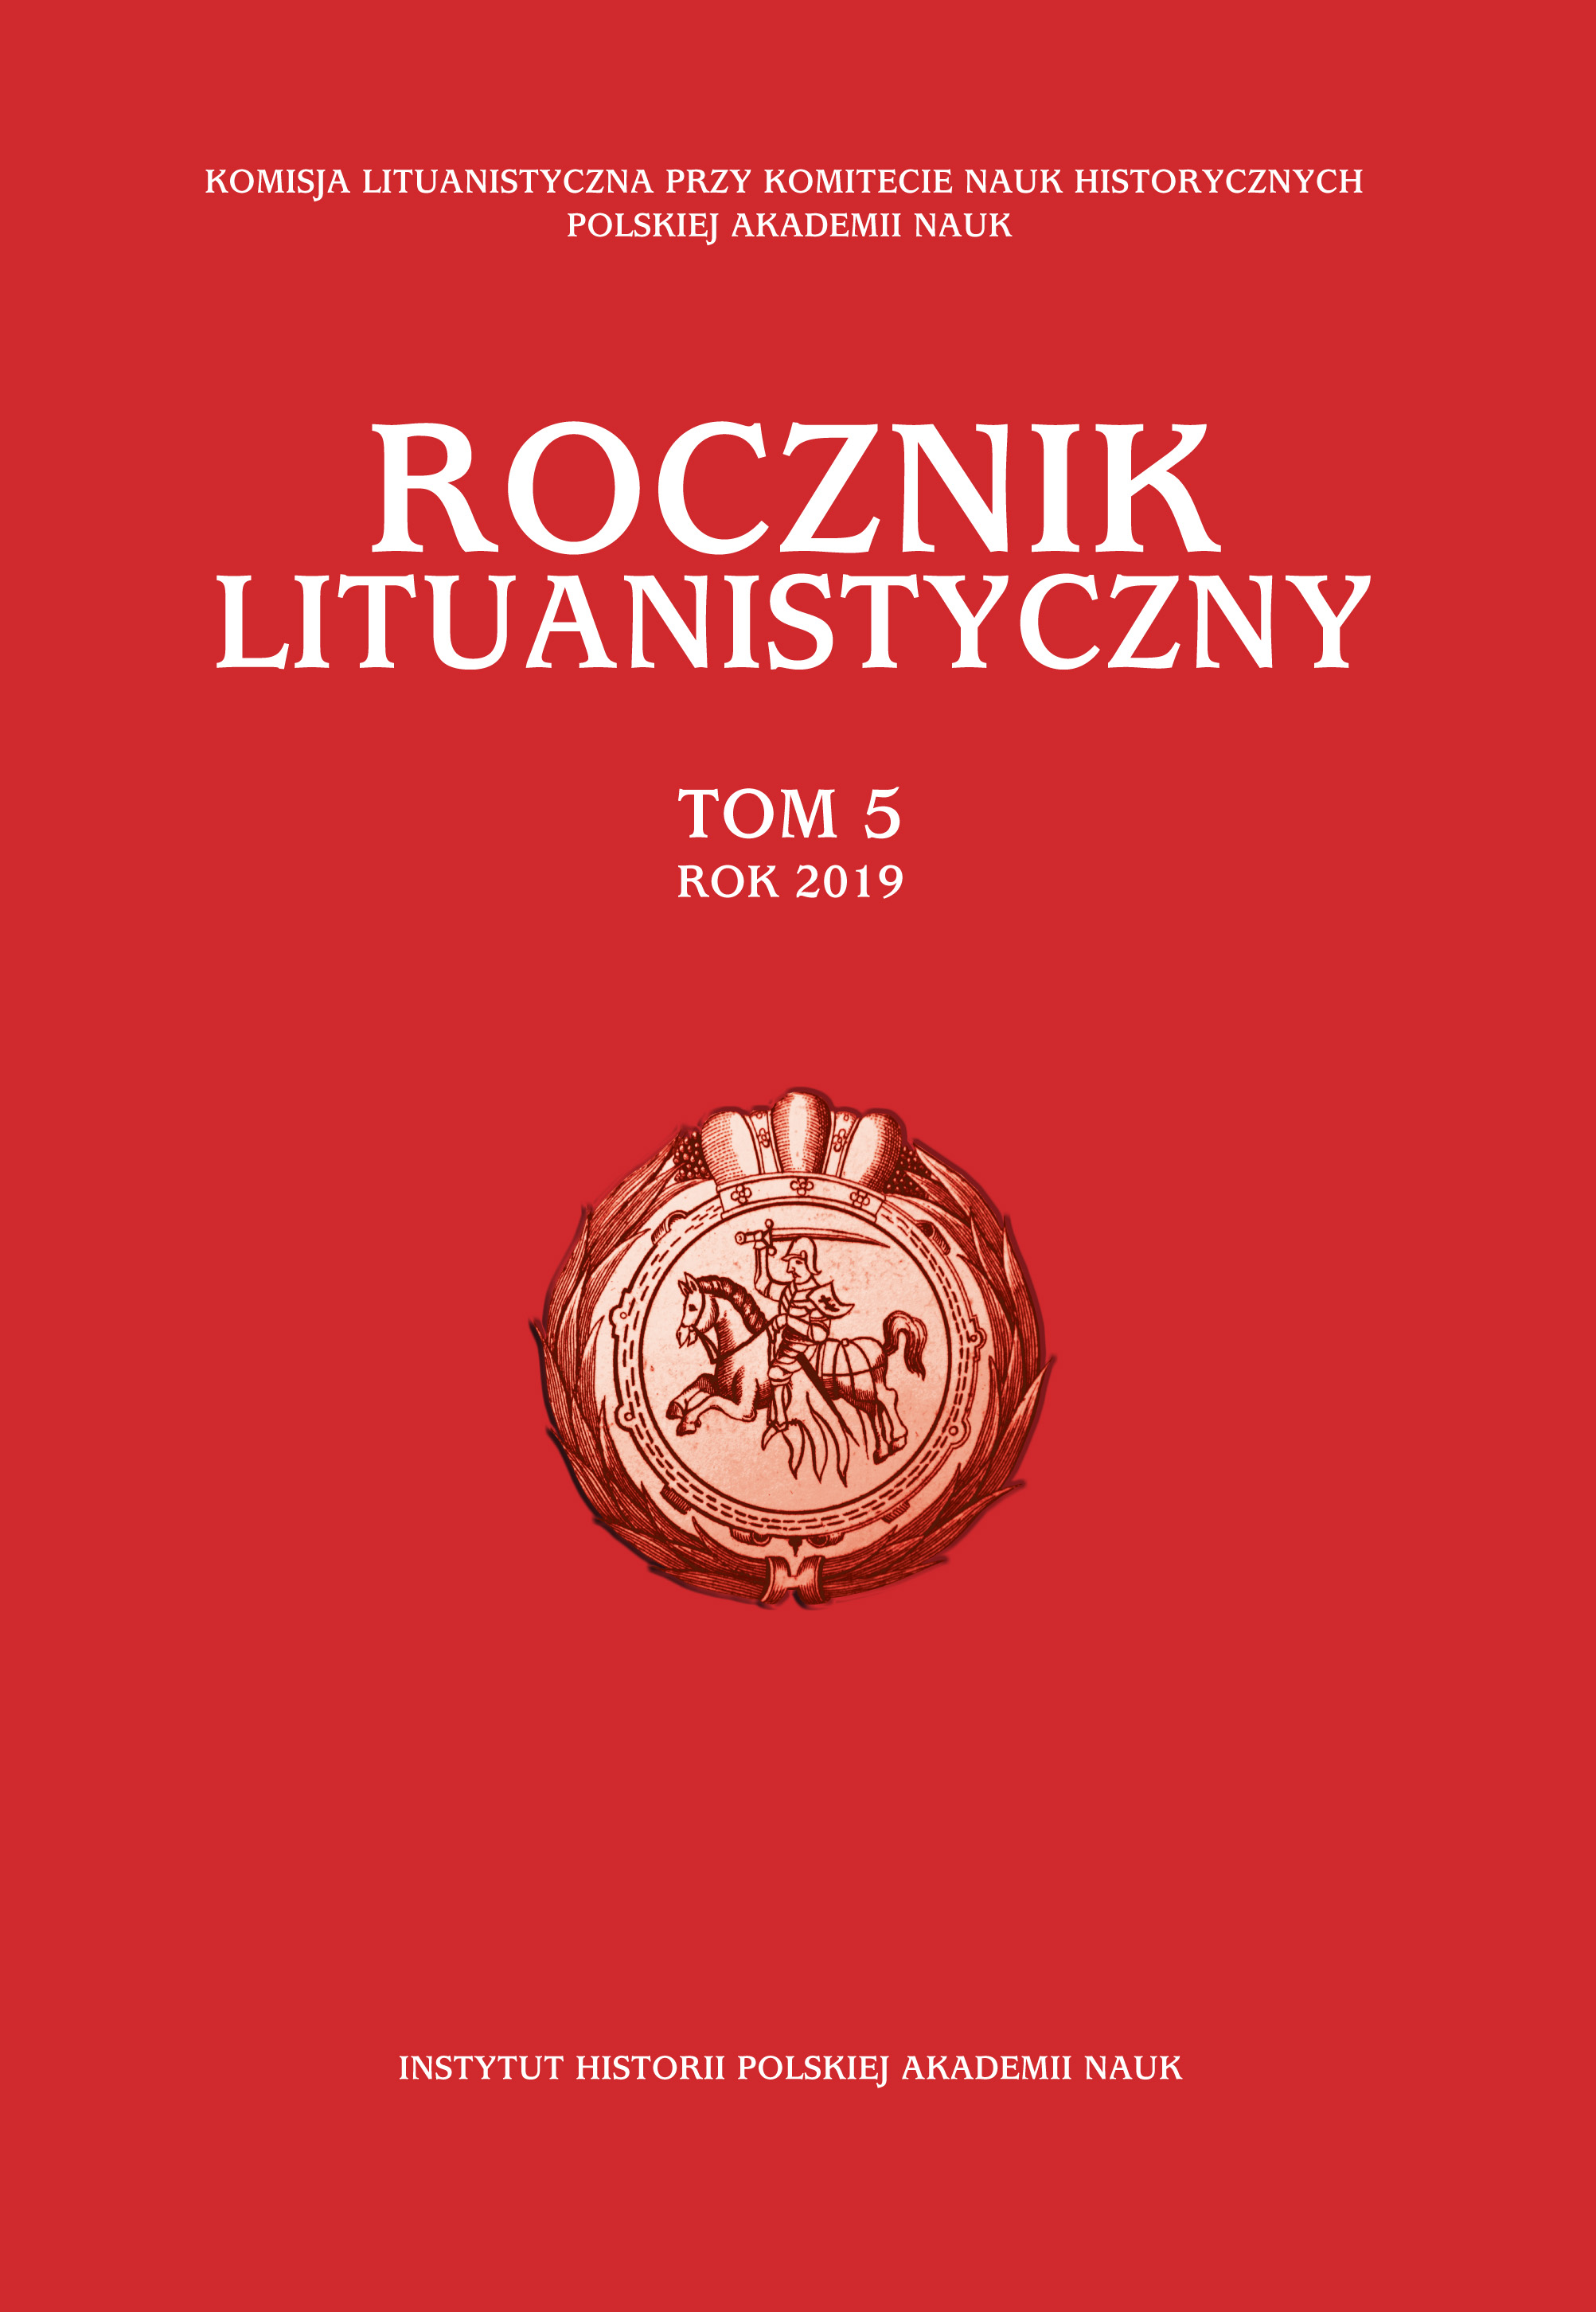 Lithuanian Yearbook Award for 2018 and 2019 Cover Image